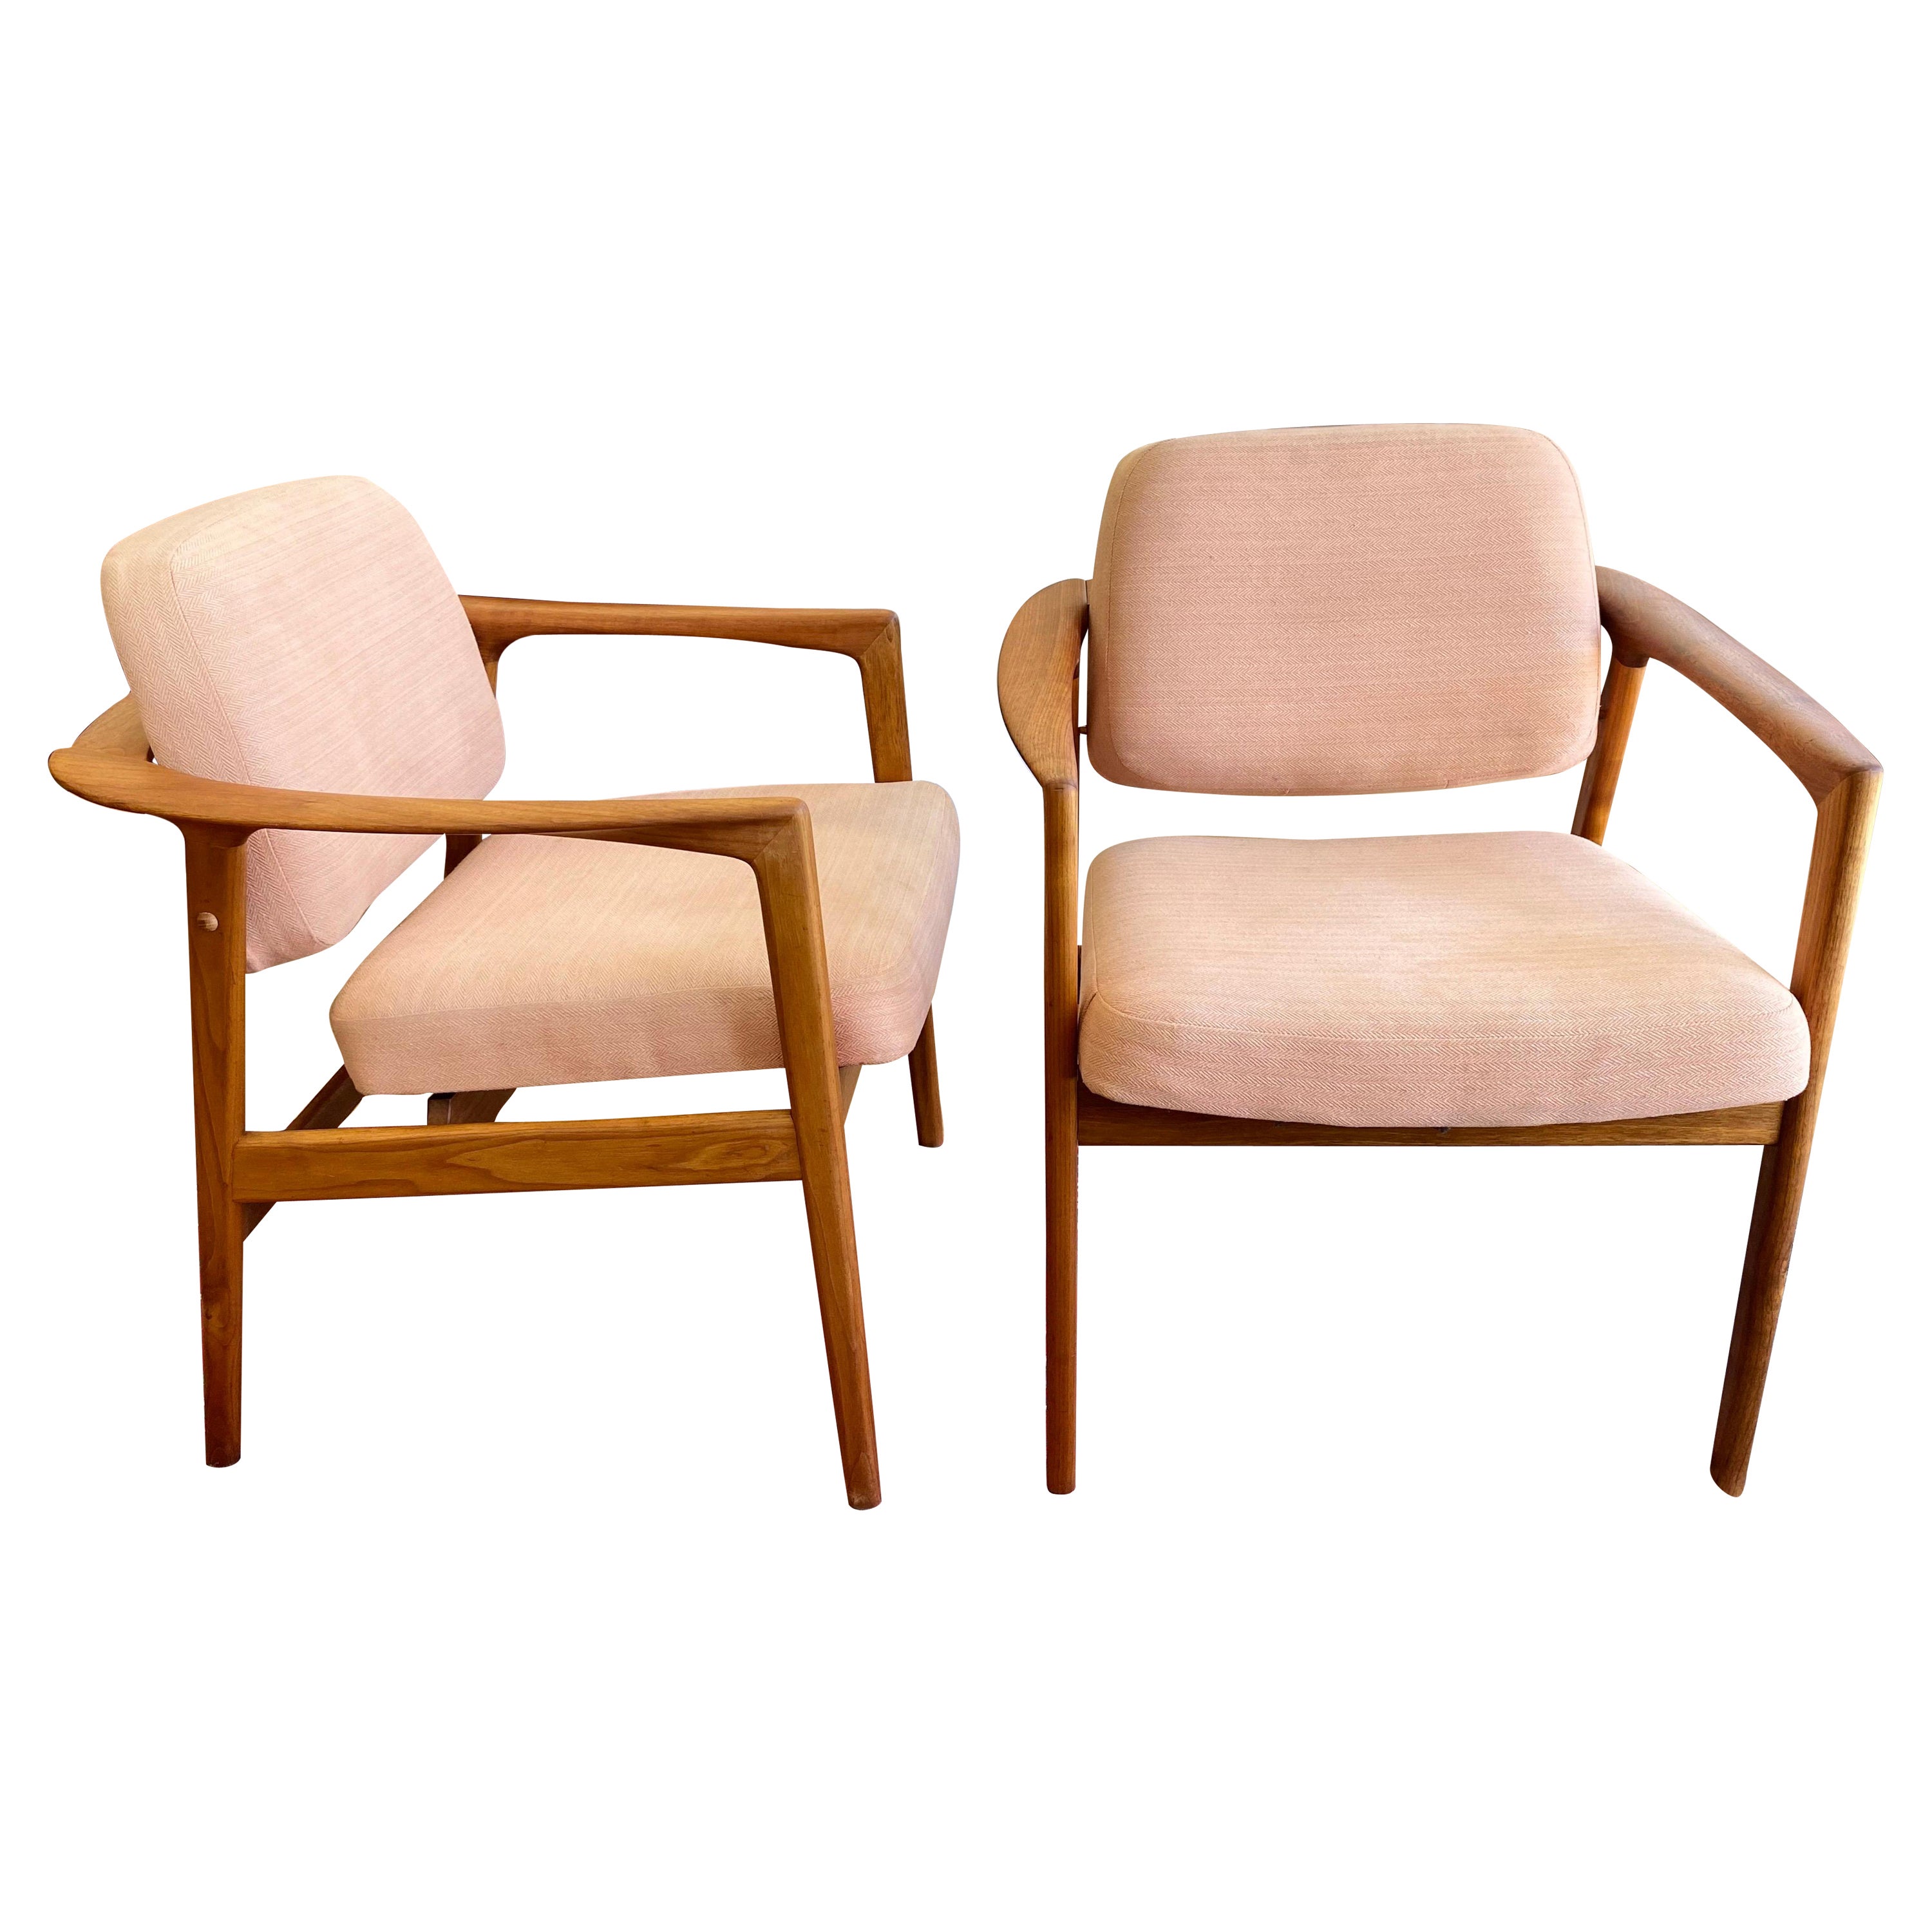 Mid-Century Modern Side Chairs by DUX